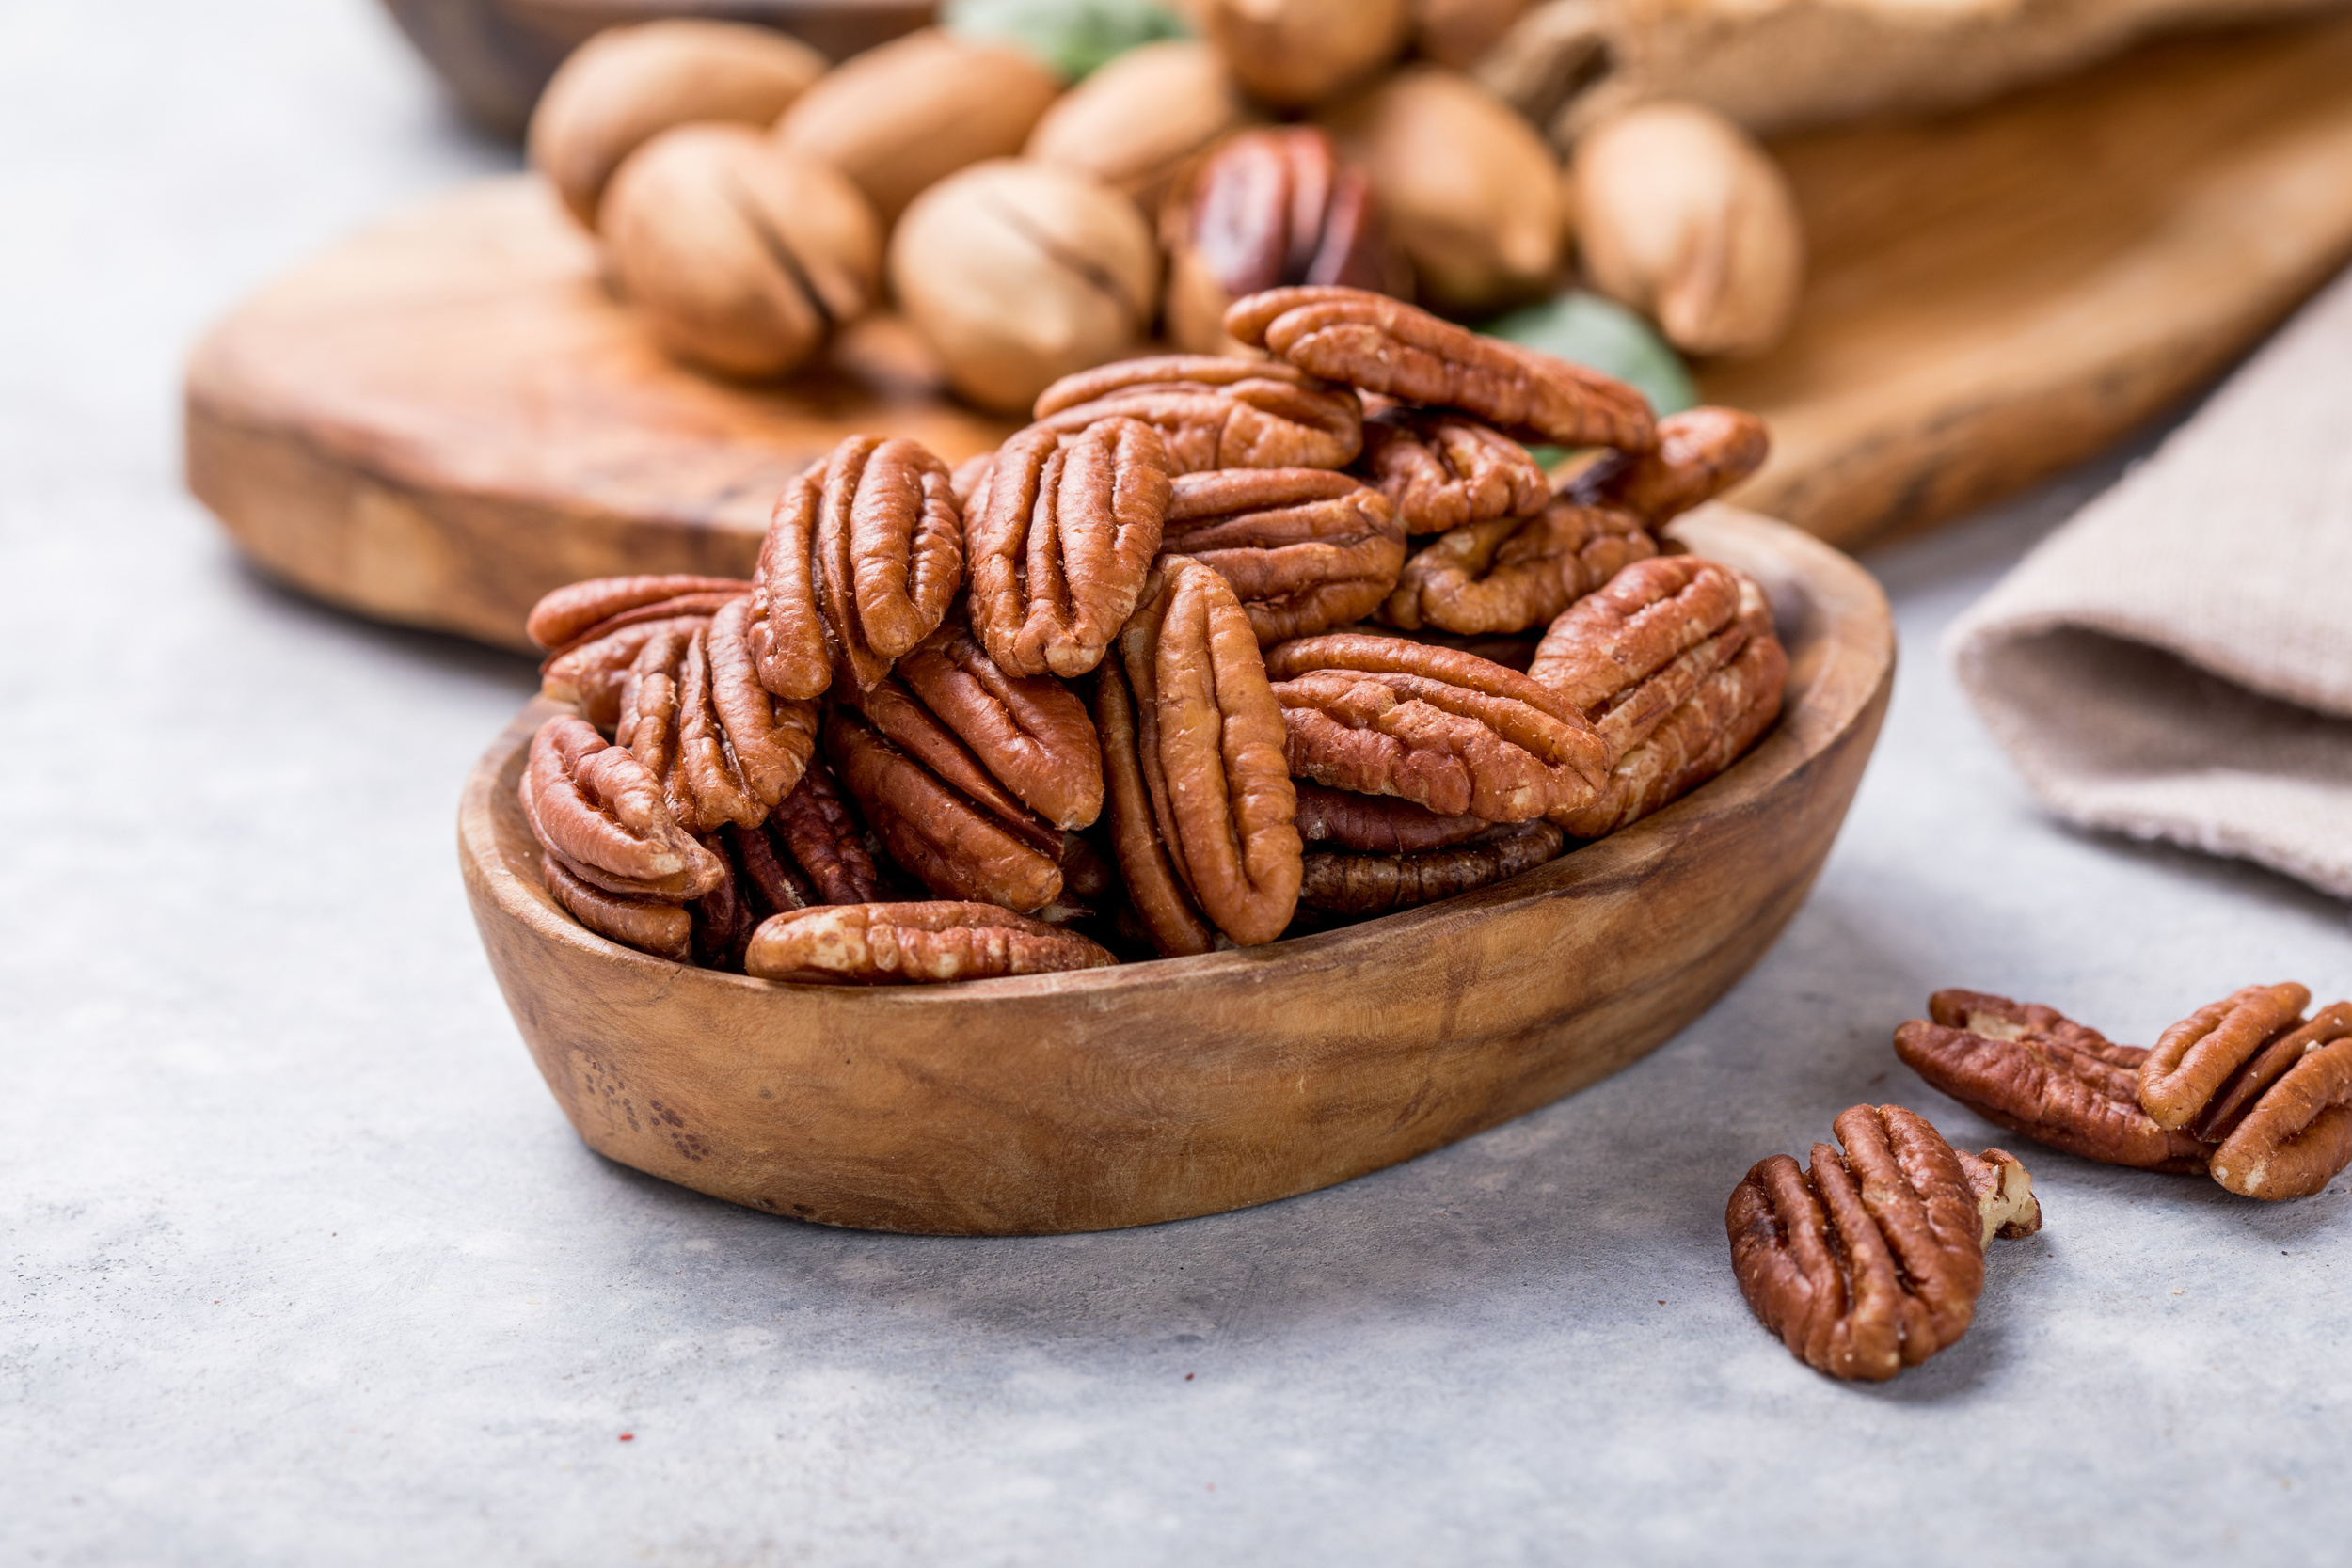 <p>Pecans are a perfectly balanced nut: They have a not-too-hard, not-too-soft texture, and they’re just a little bit sweet. They also contain 19 vitamins and minerals—including vitamins A, B, and E, as well as calcium, magnesium, and phosphorus—and also some fiber and protein. They’re sort of similar to walnuts but a bit cheaper!</p>